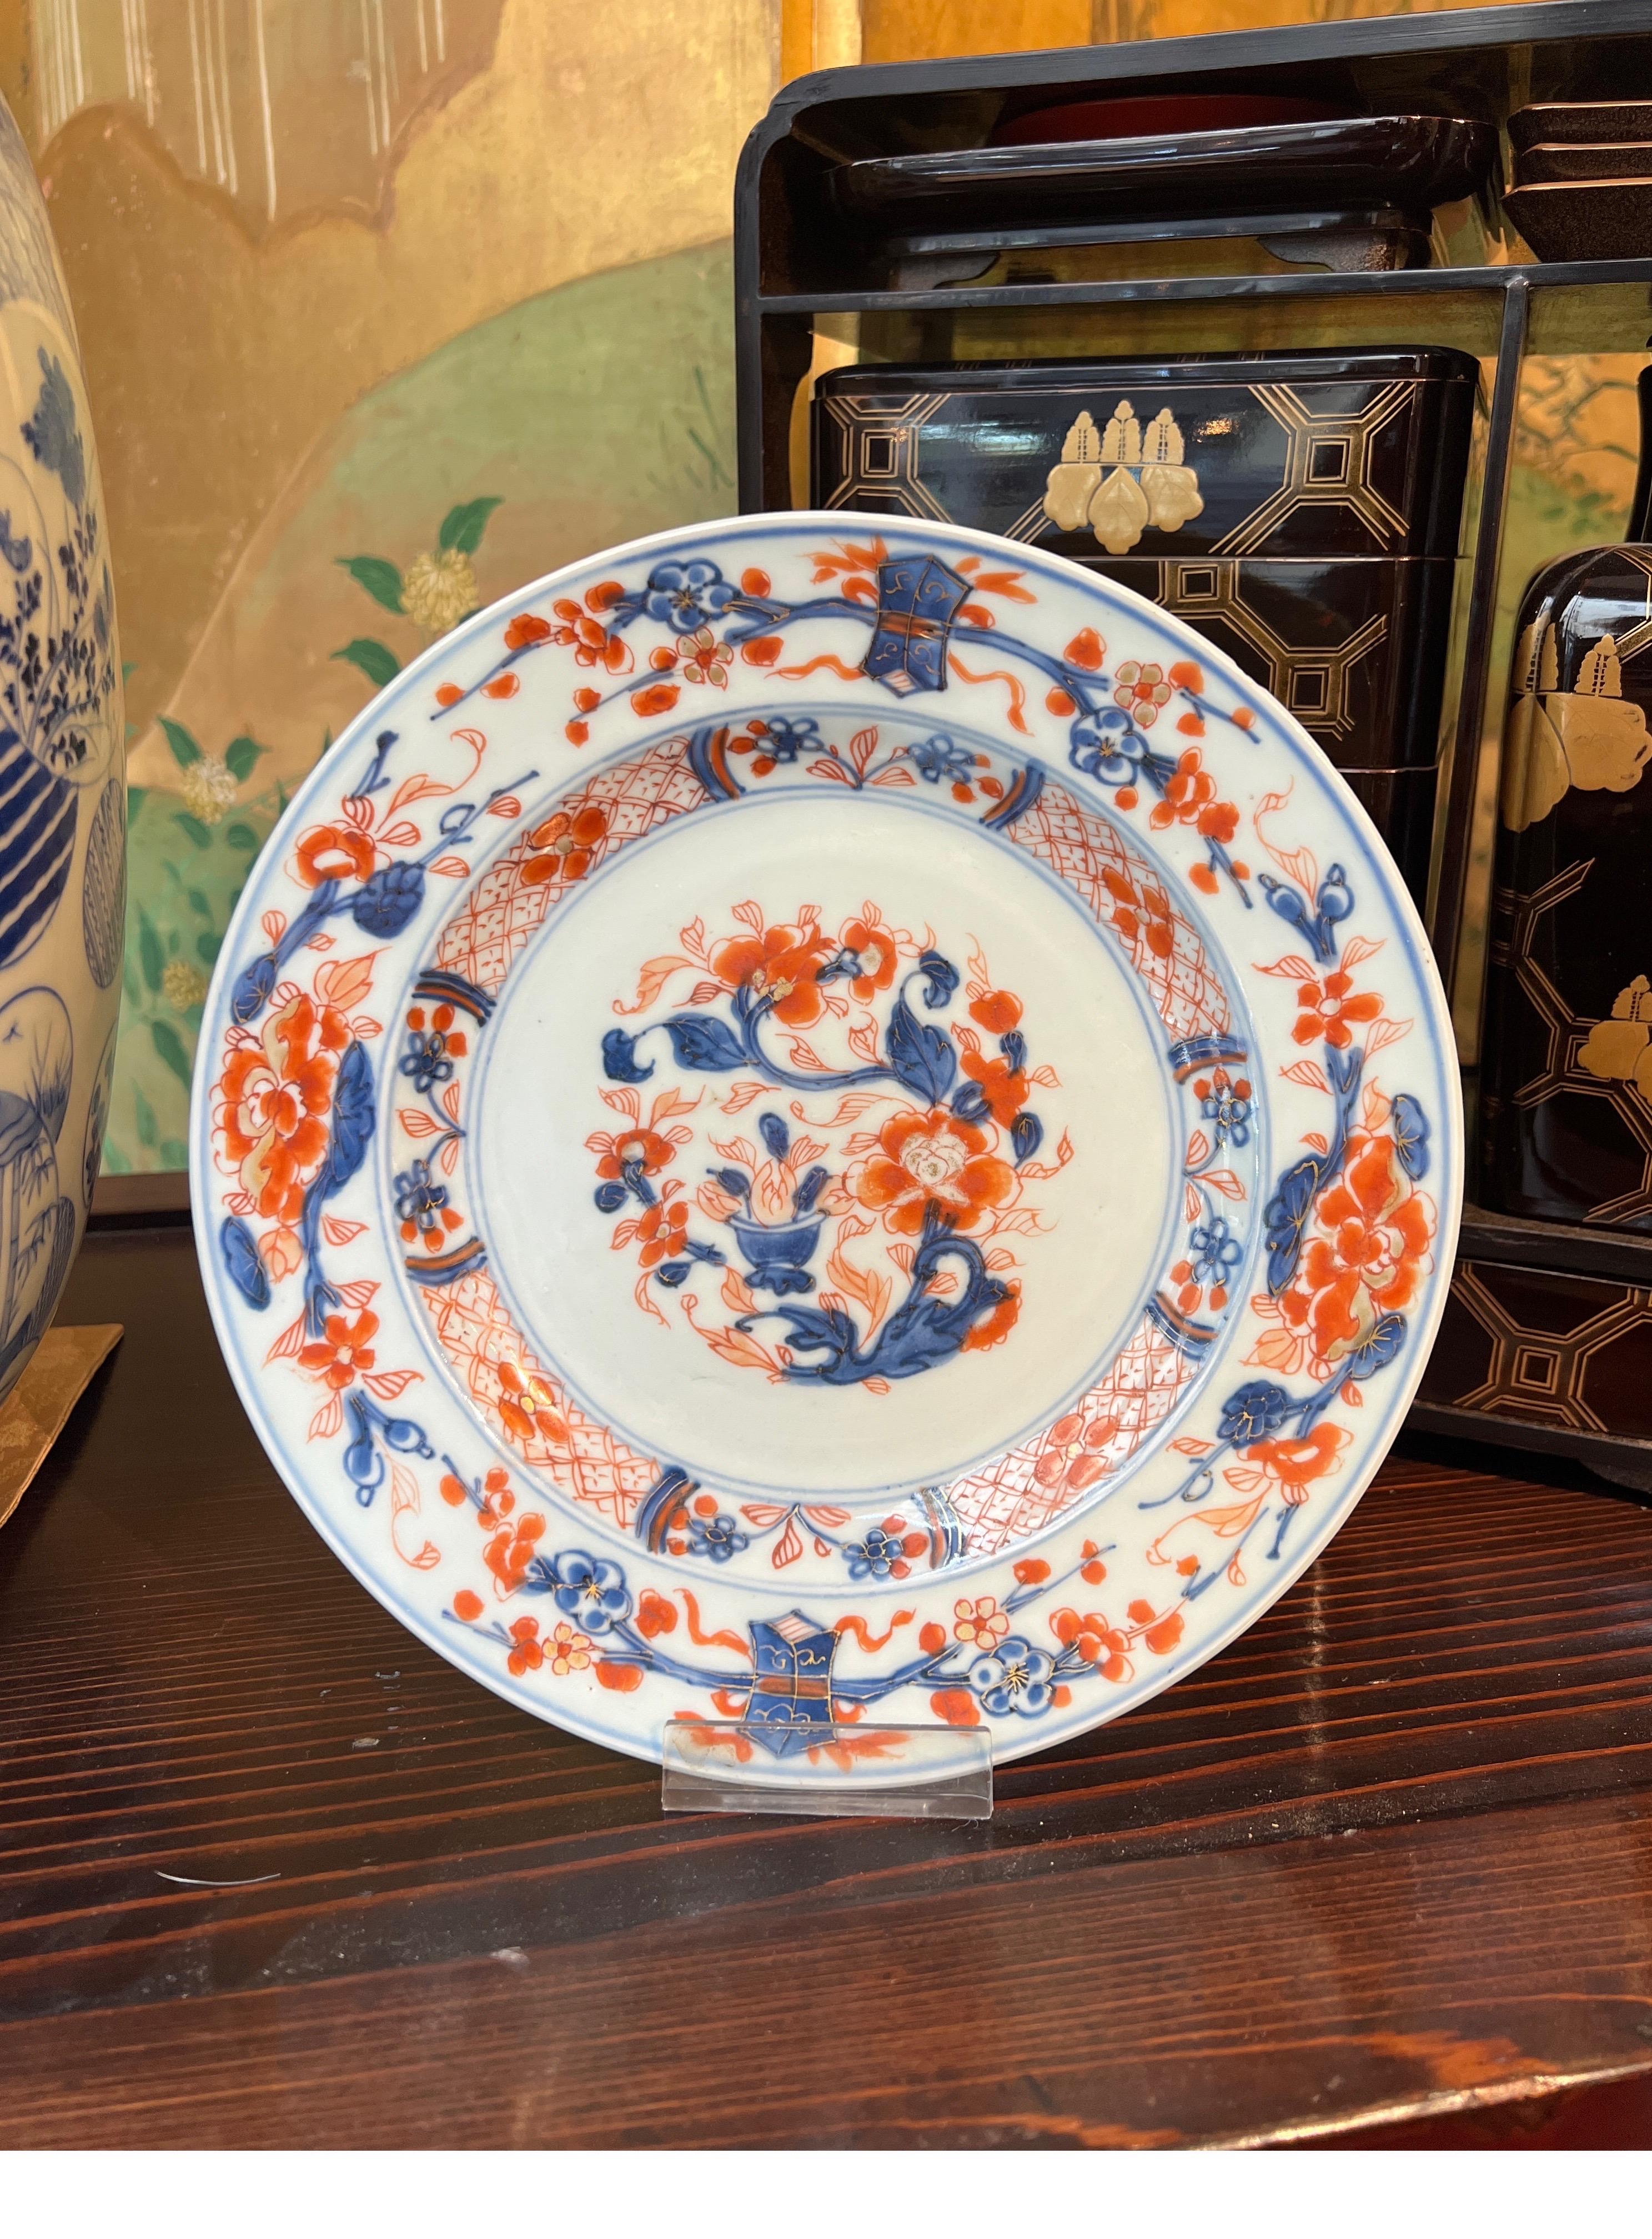 Hand-Painted China, 18th Century Chinese Export Imari Porcelain Plate with vase pattern 1710